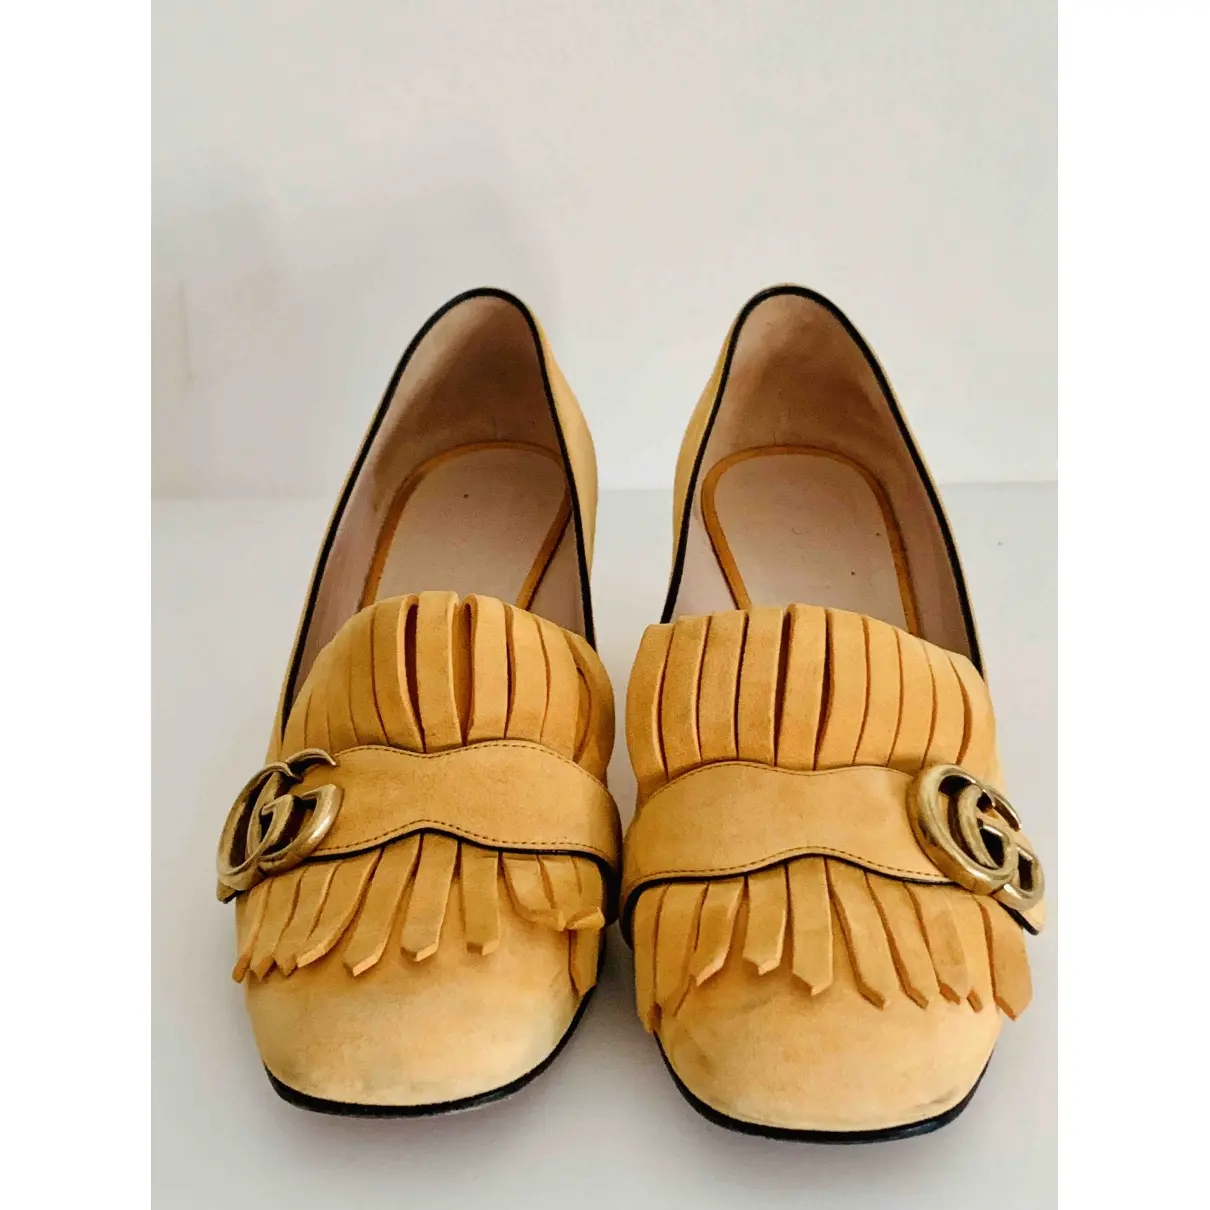 Gucci Marmont heels for sale